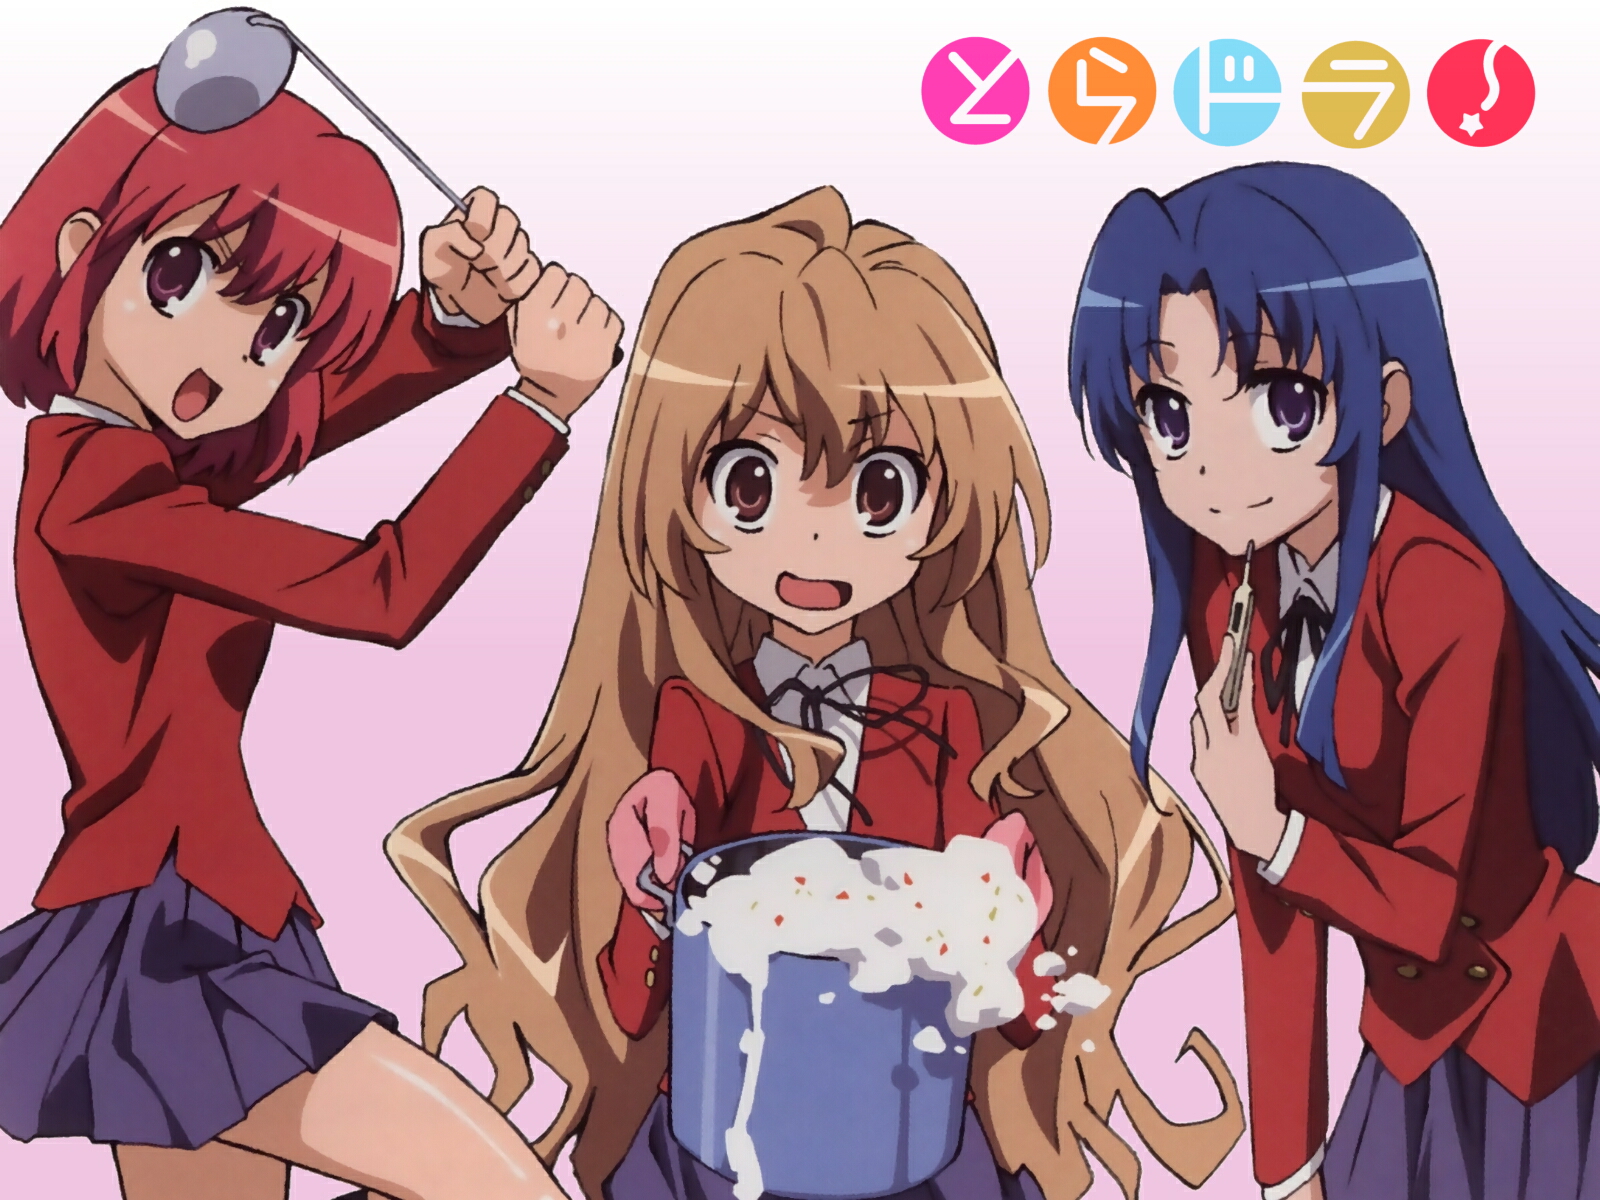 Toradora! anime characters, standing against a vibrant backdrop, radiating a captivating atmosphere.